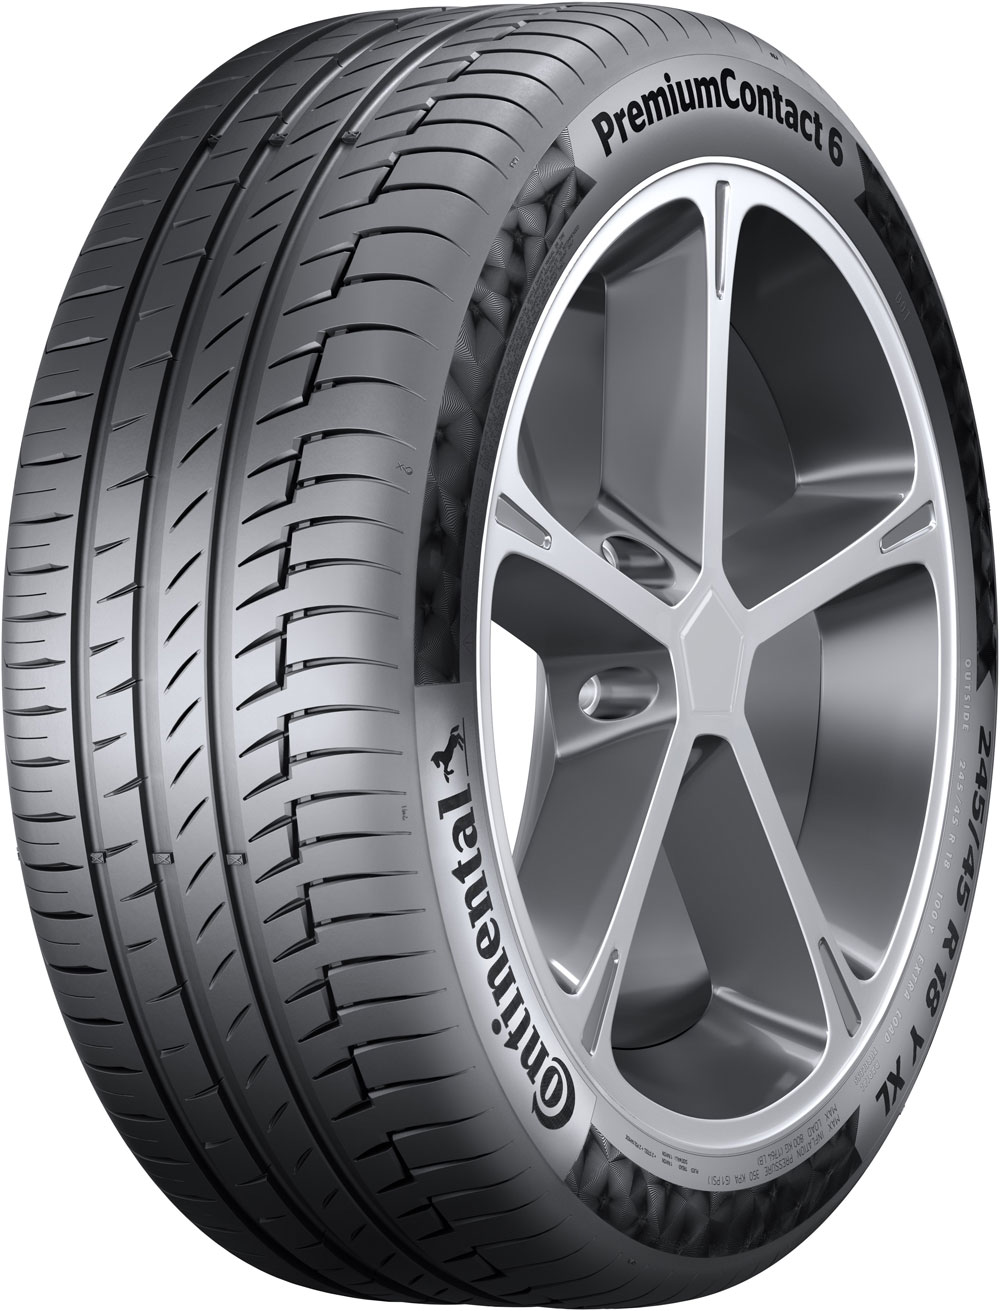 Anvelope auto CONTINENTAL PremiumContact 6 -V XL MERCEDES 245/50 R18 104H